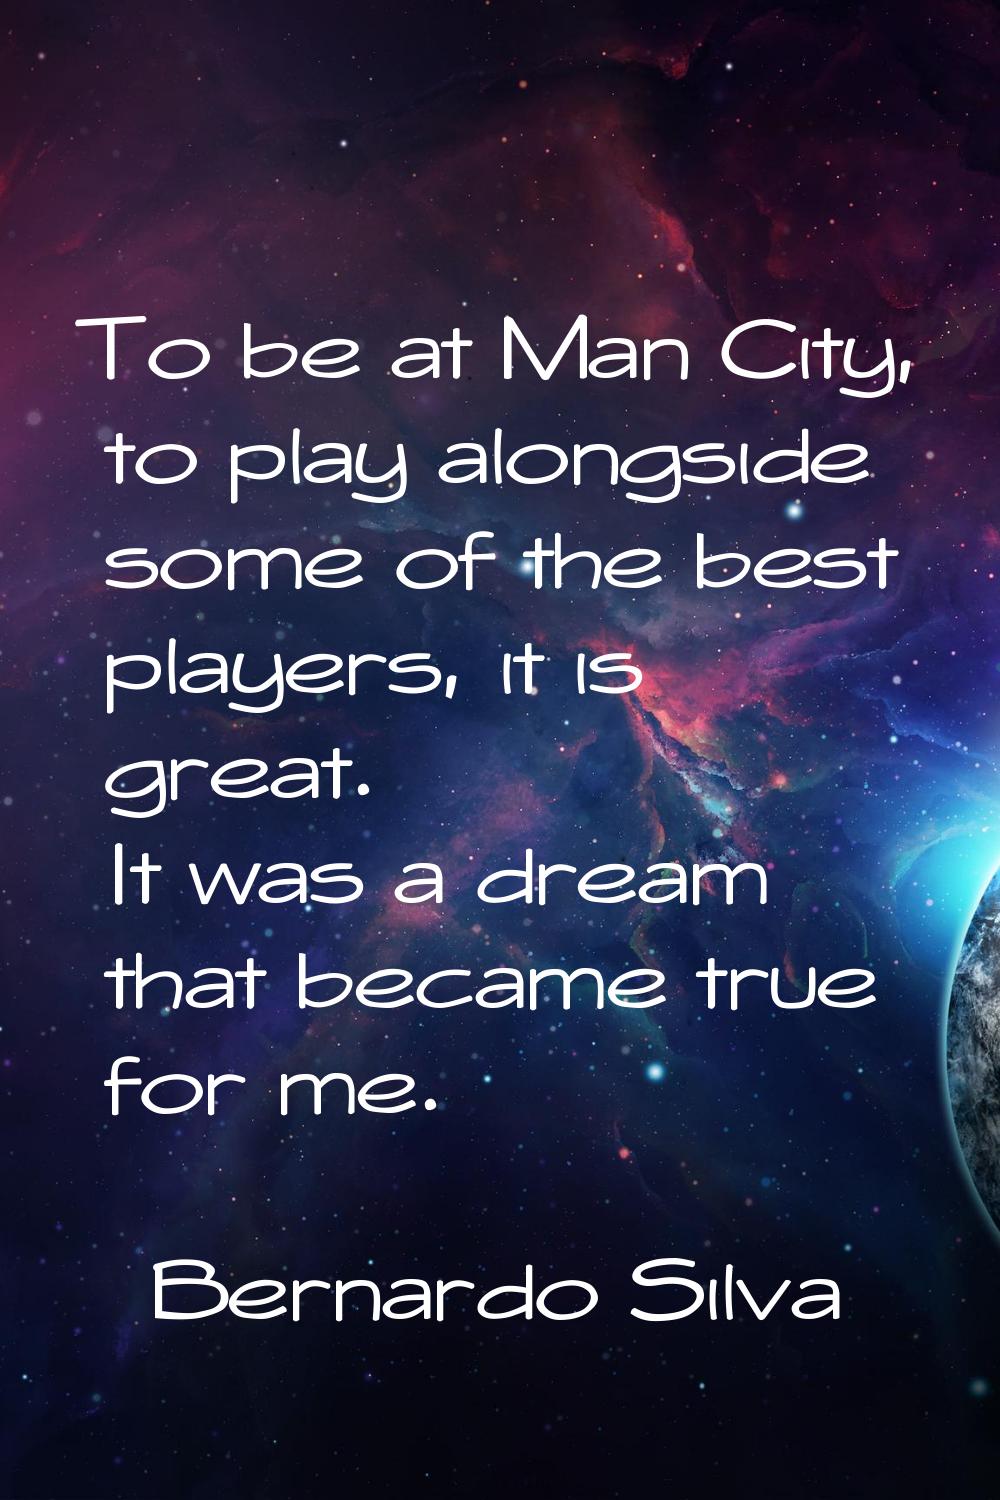 To be at Man City, to play alongside some of the best players, it is great. It was a dream that bec